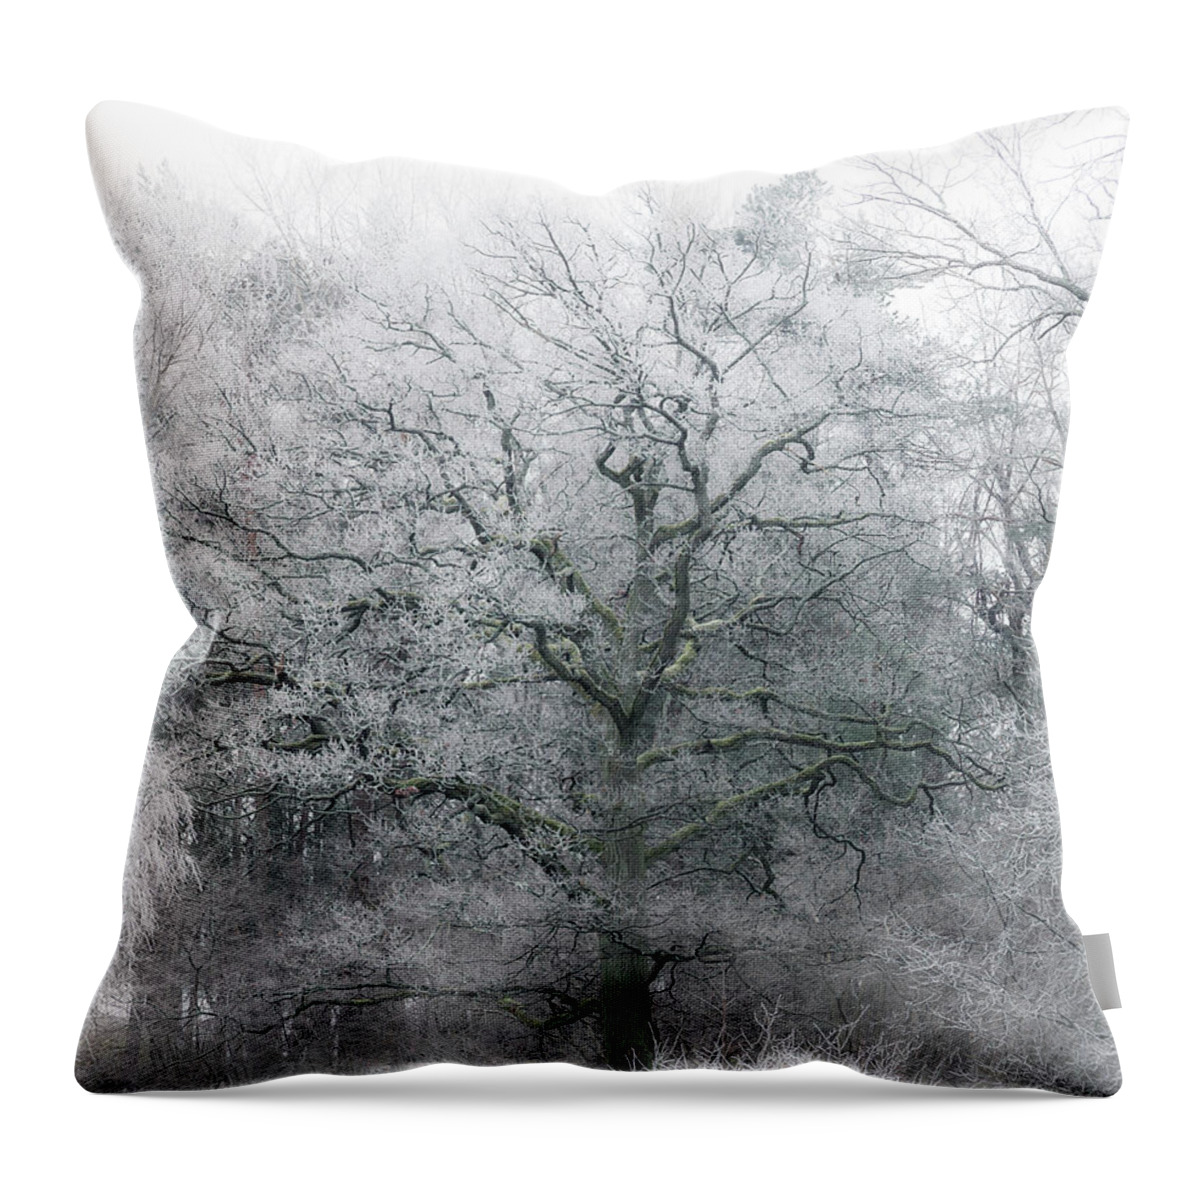 Winter Throw Pillow featuring the photograph Frosty Winter Tree by Nicklas Gustafsson